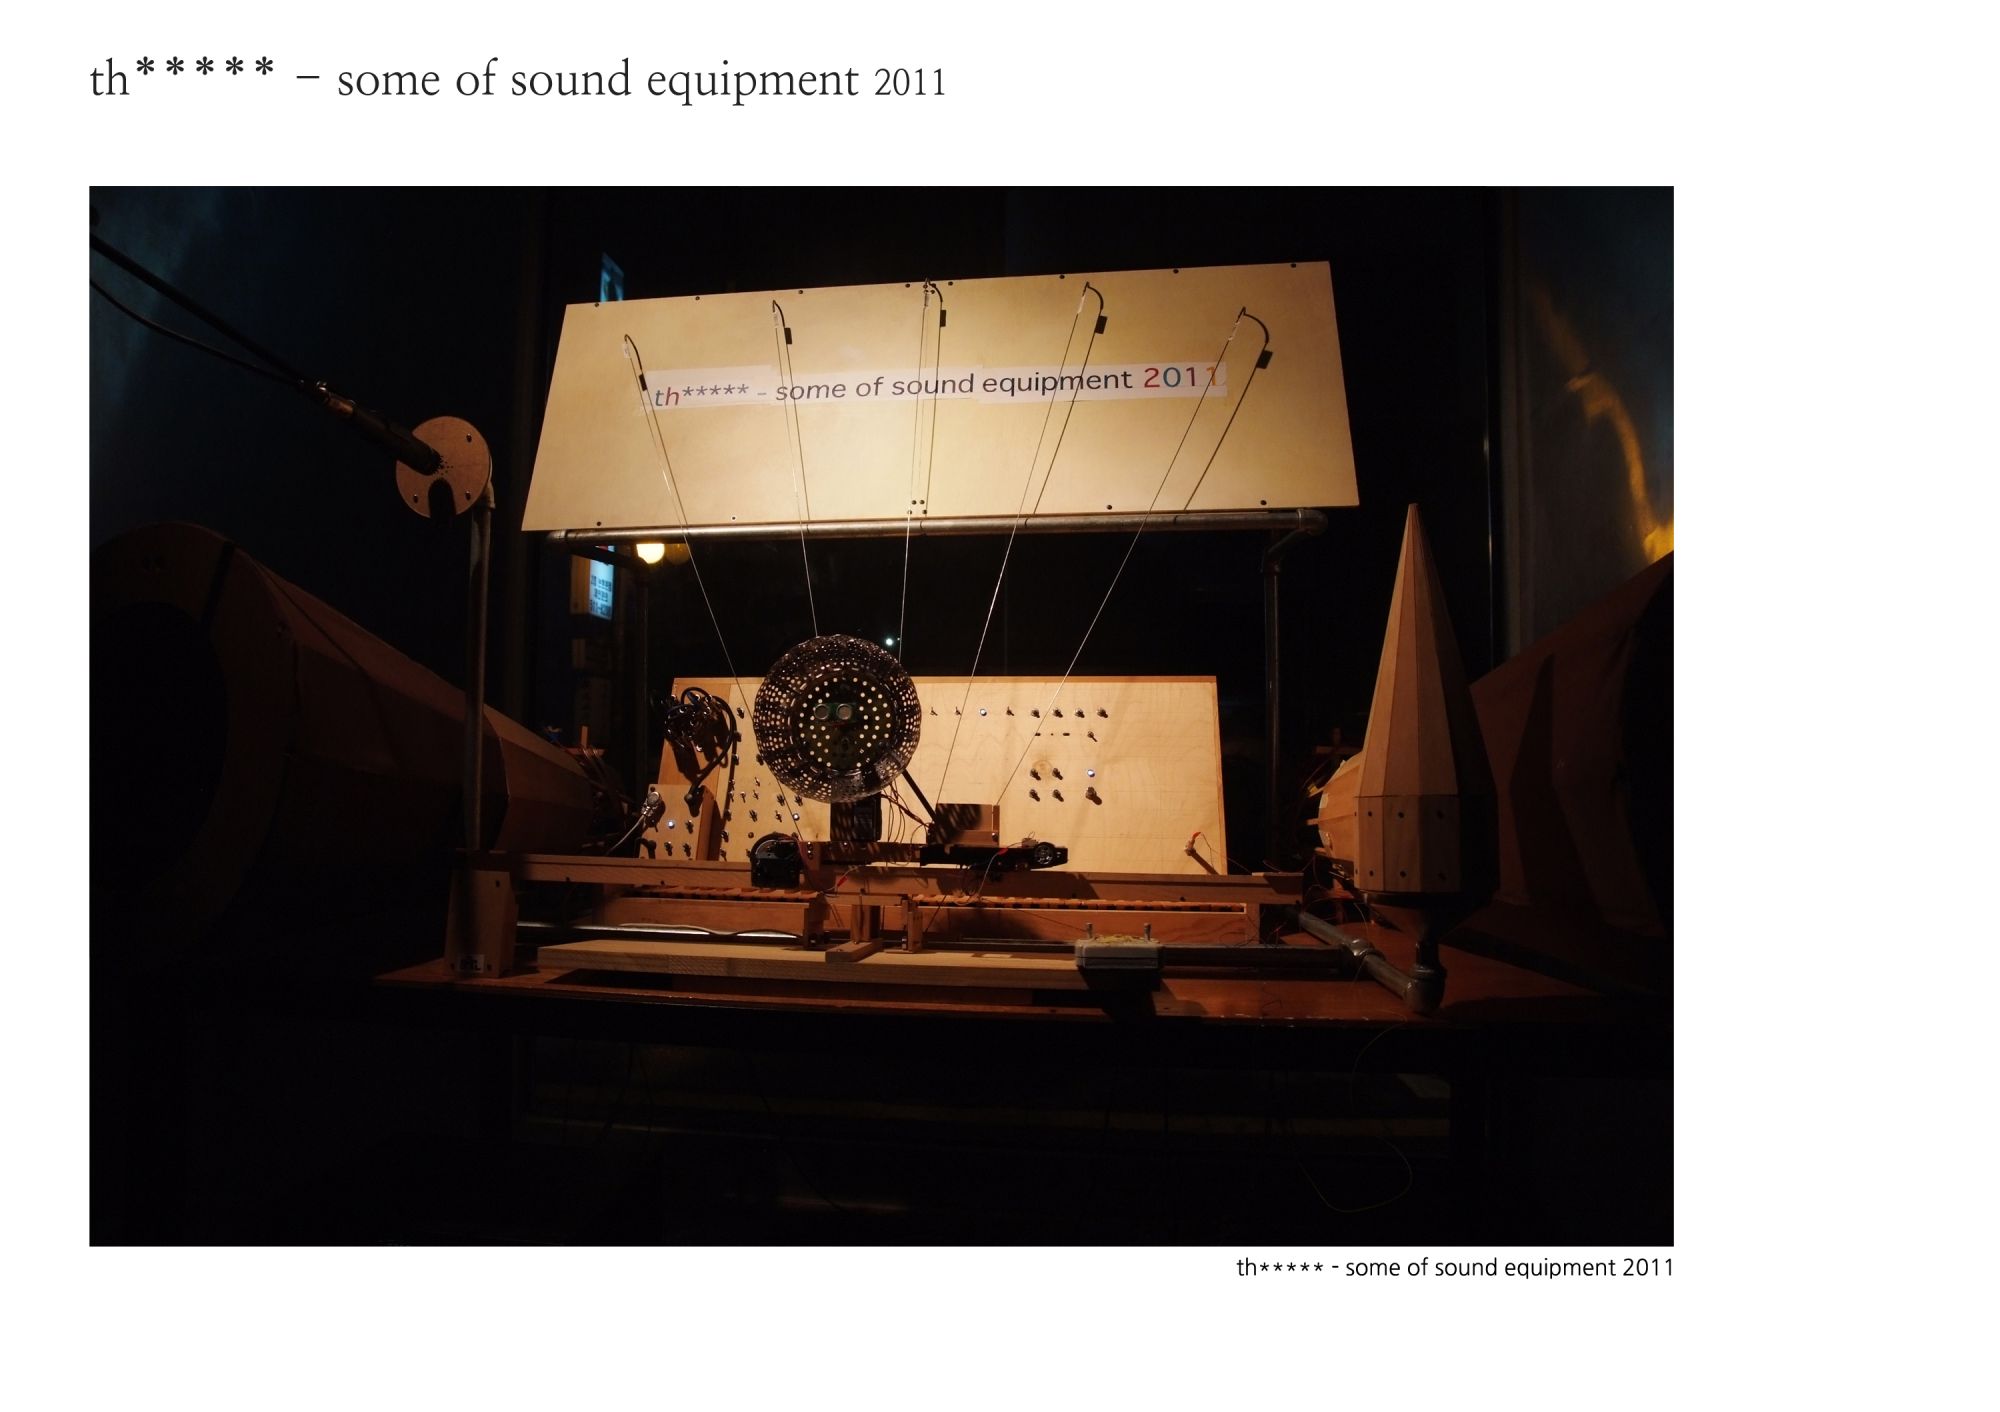 th - some of sound equipment 2011 12